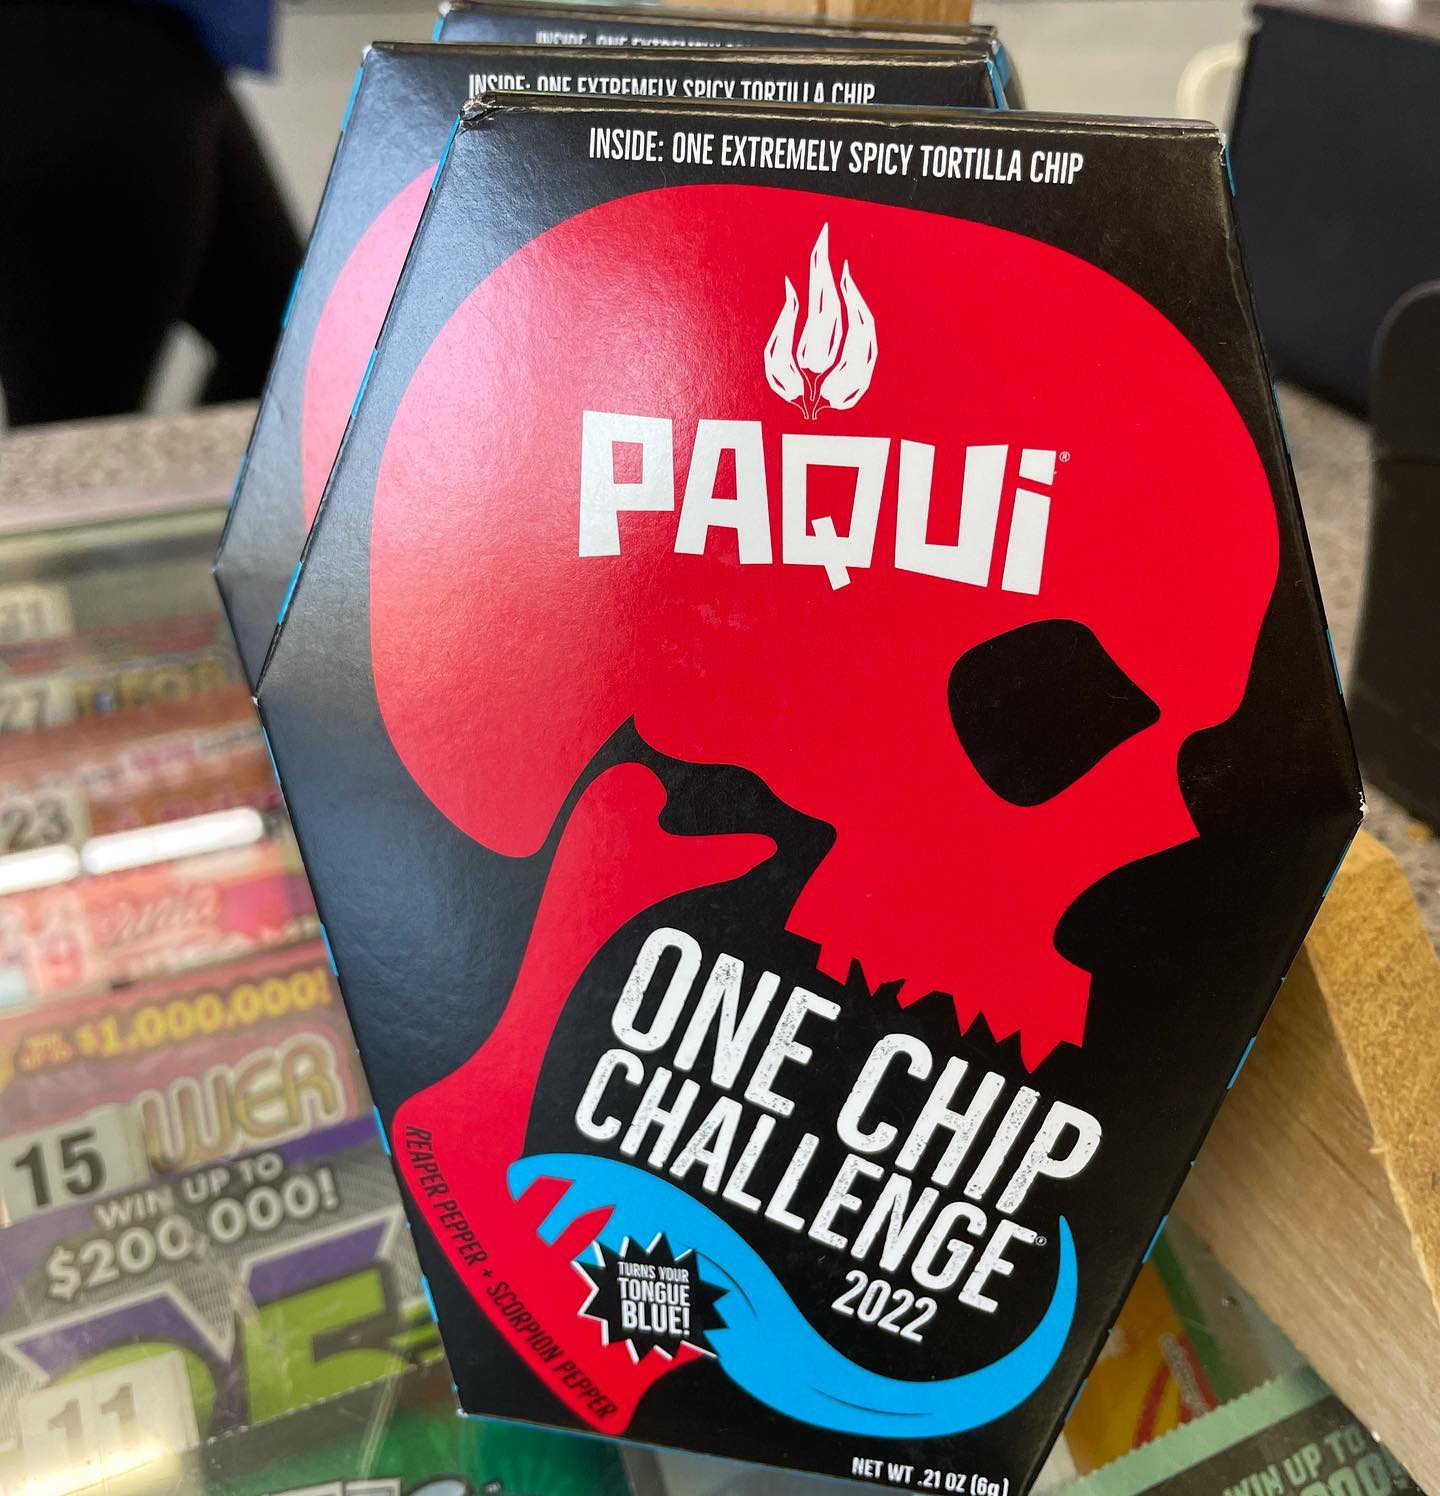 Do you dare? 🔥🔥 Take the Paqui One Chip Challenge while you can - these are already selling out. Currently available at most c-stores and snack stores. #paquionechipchallenge #paqui